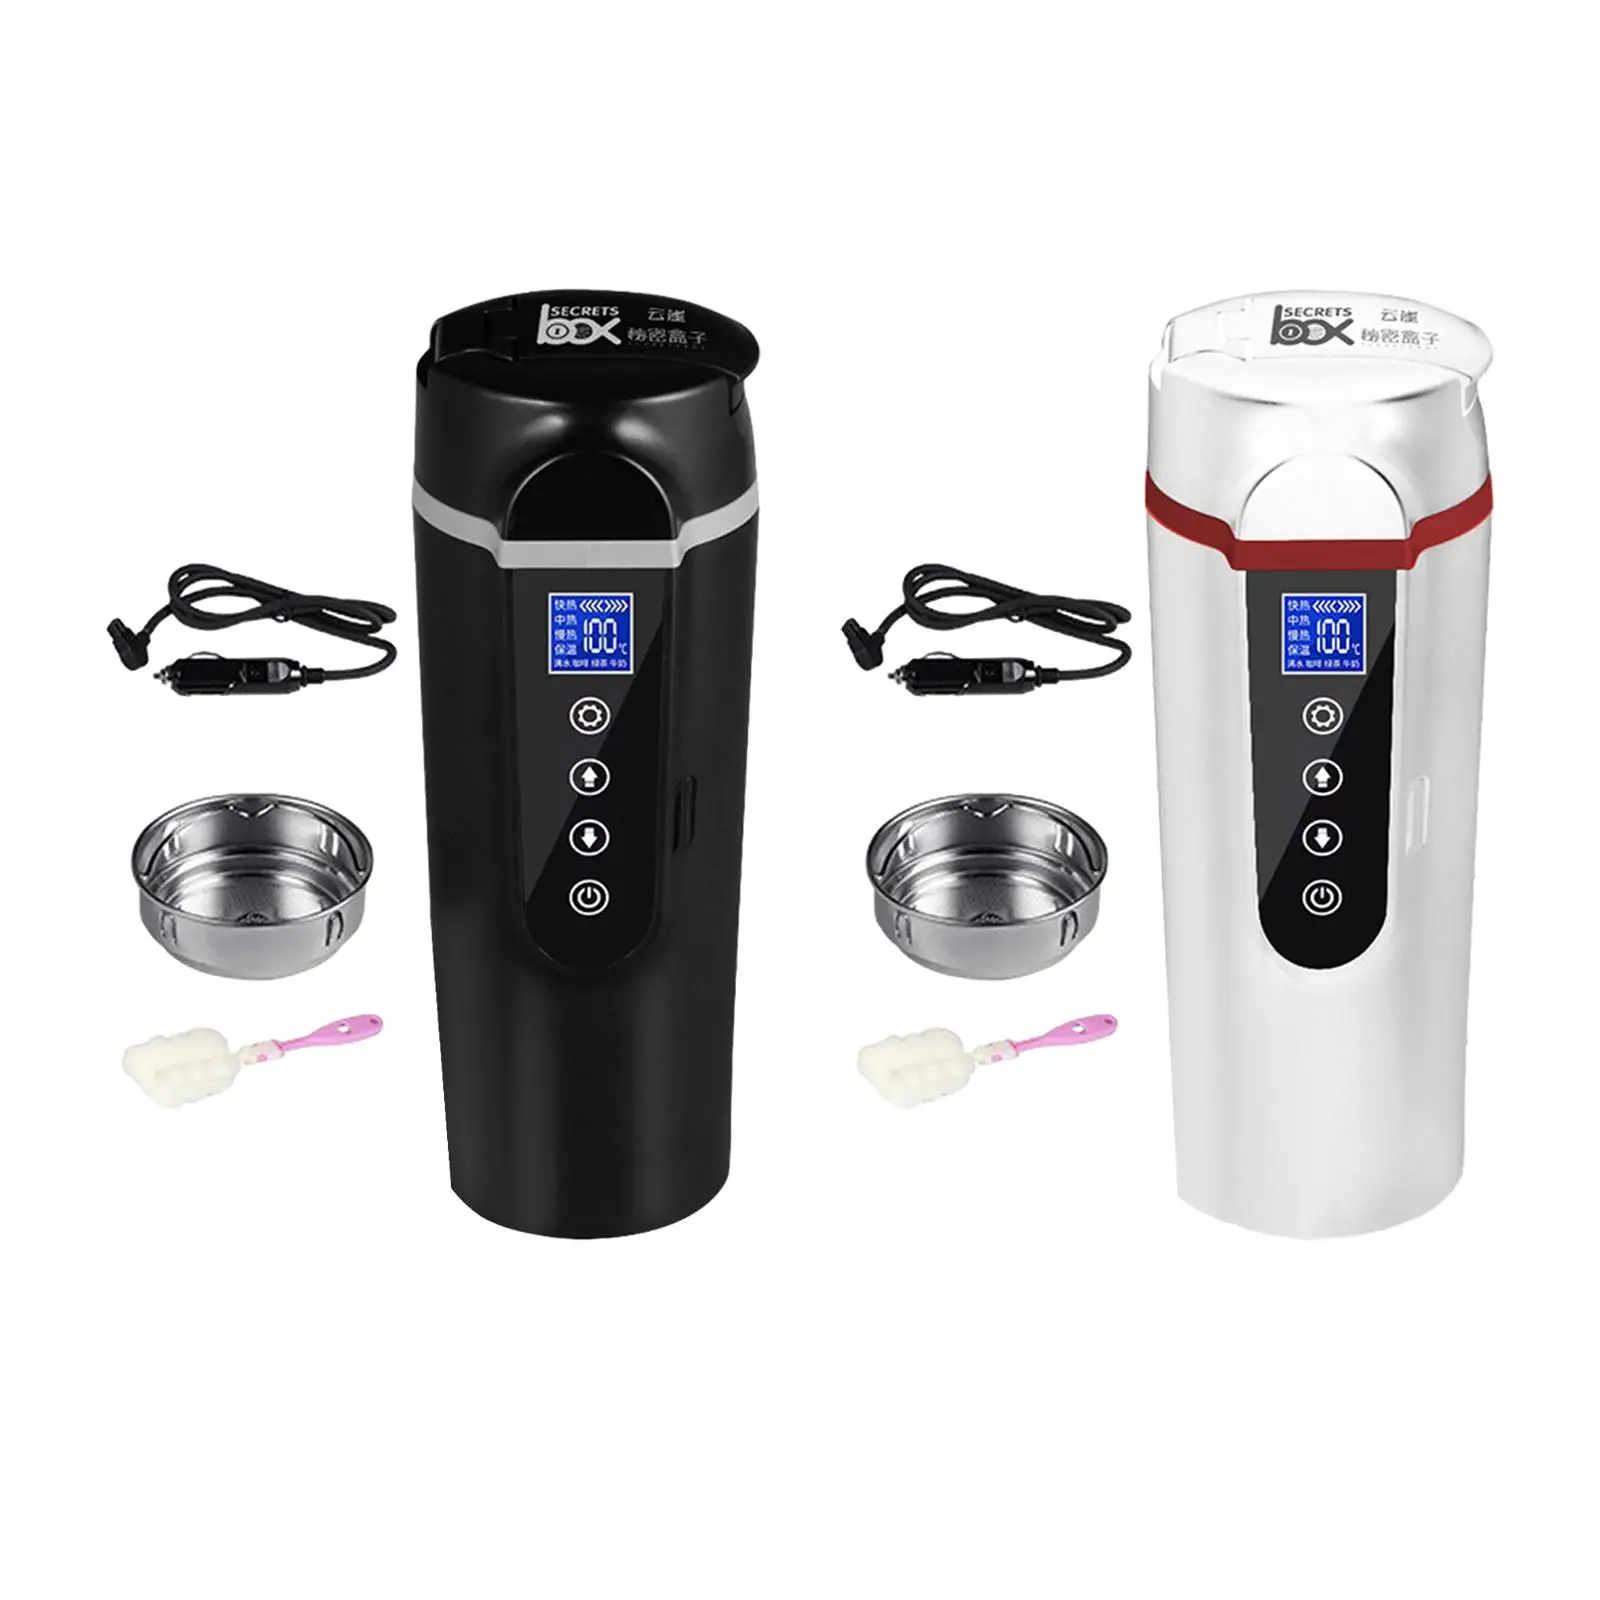 Car Heating Cup Large LED Display Screen Smart Leakproof Travel Coffee Mug for Drivers Auto Car Airplane Camping Tea Water Milk